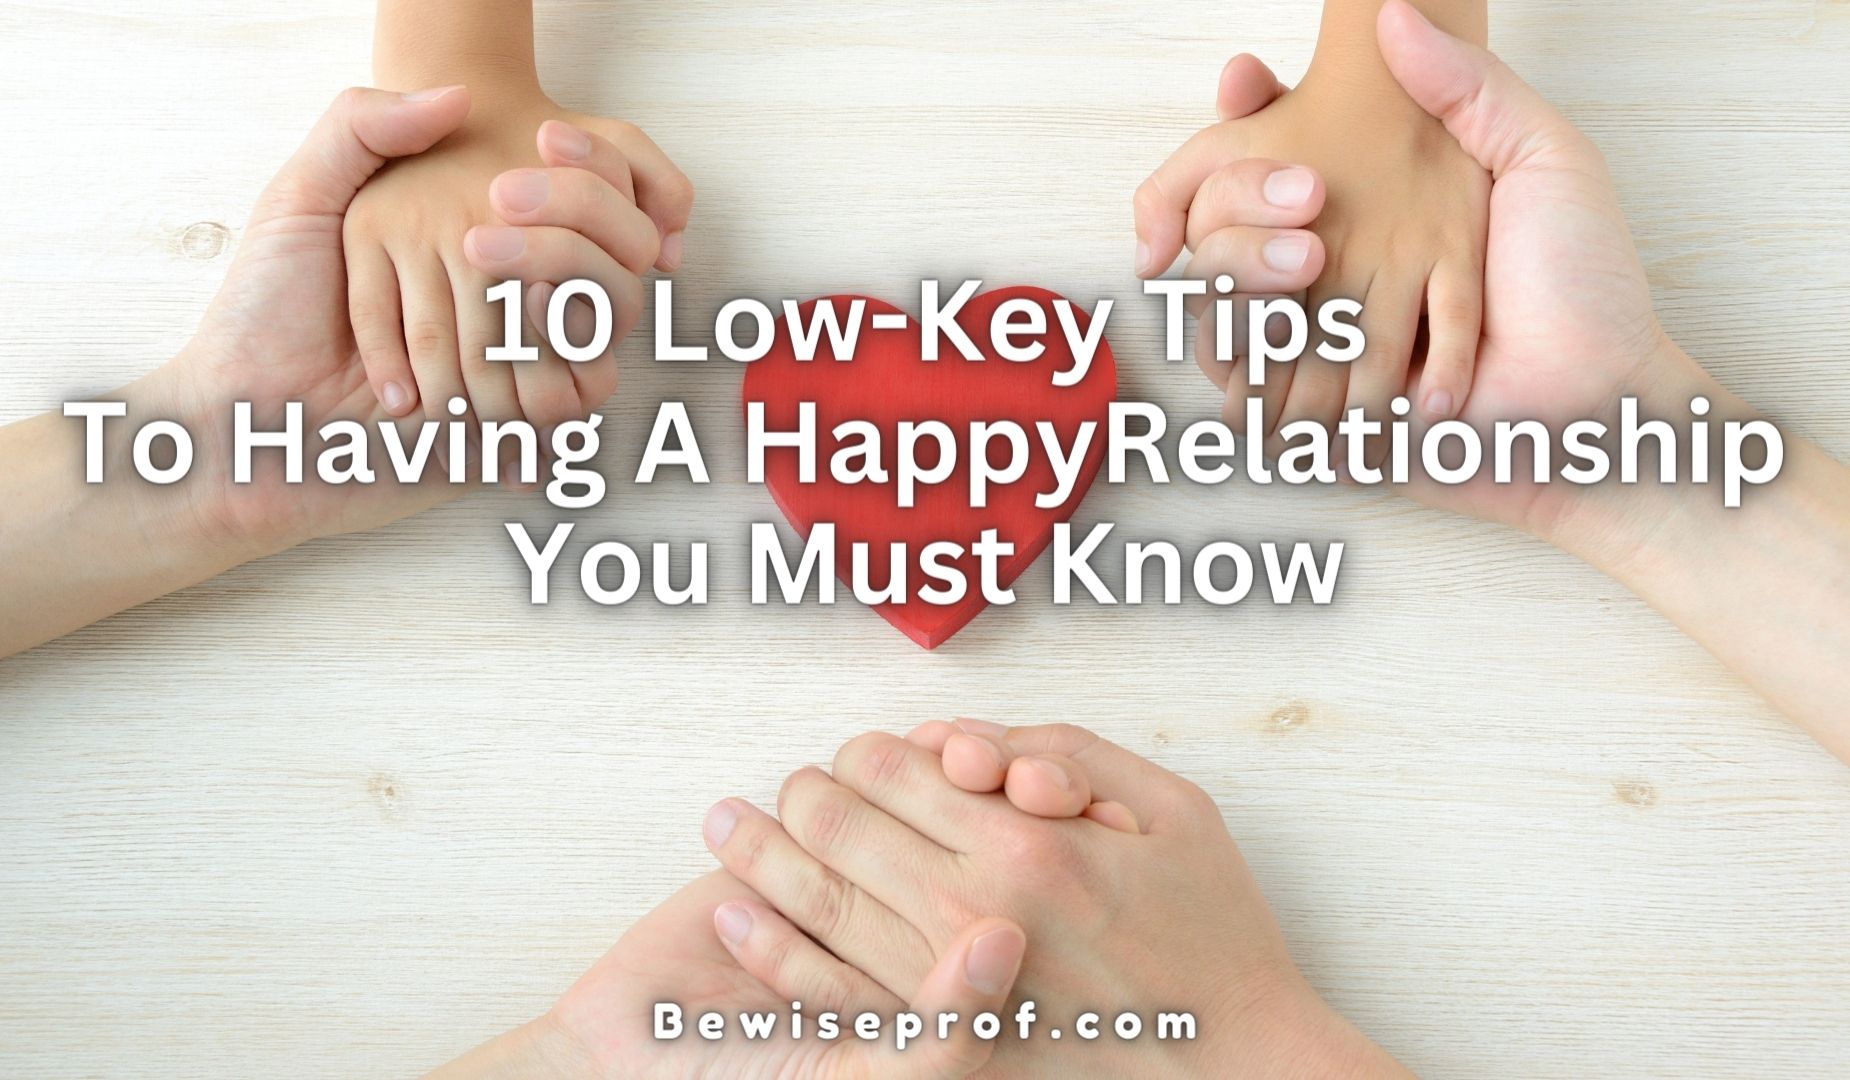 10 Low-Key Tips To Having A Happy Relationship You Must Know